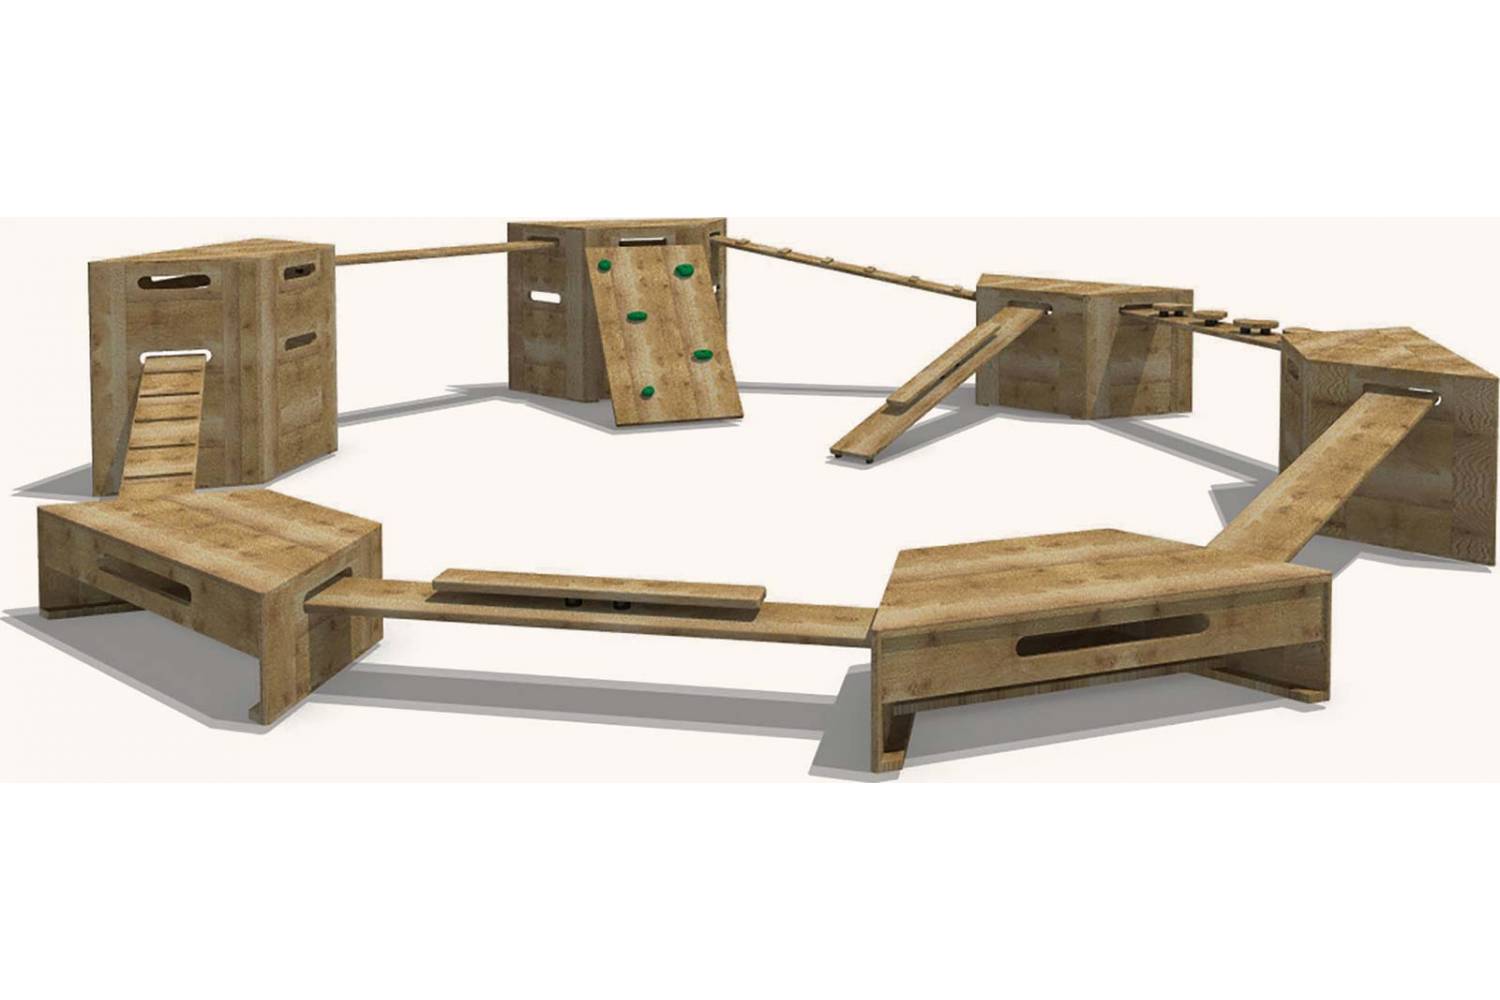 outdoor wooden play package